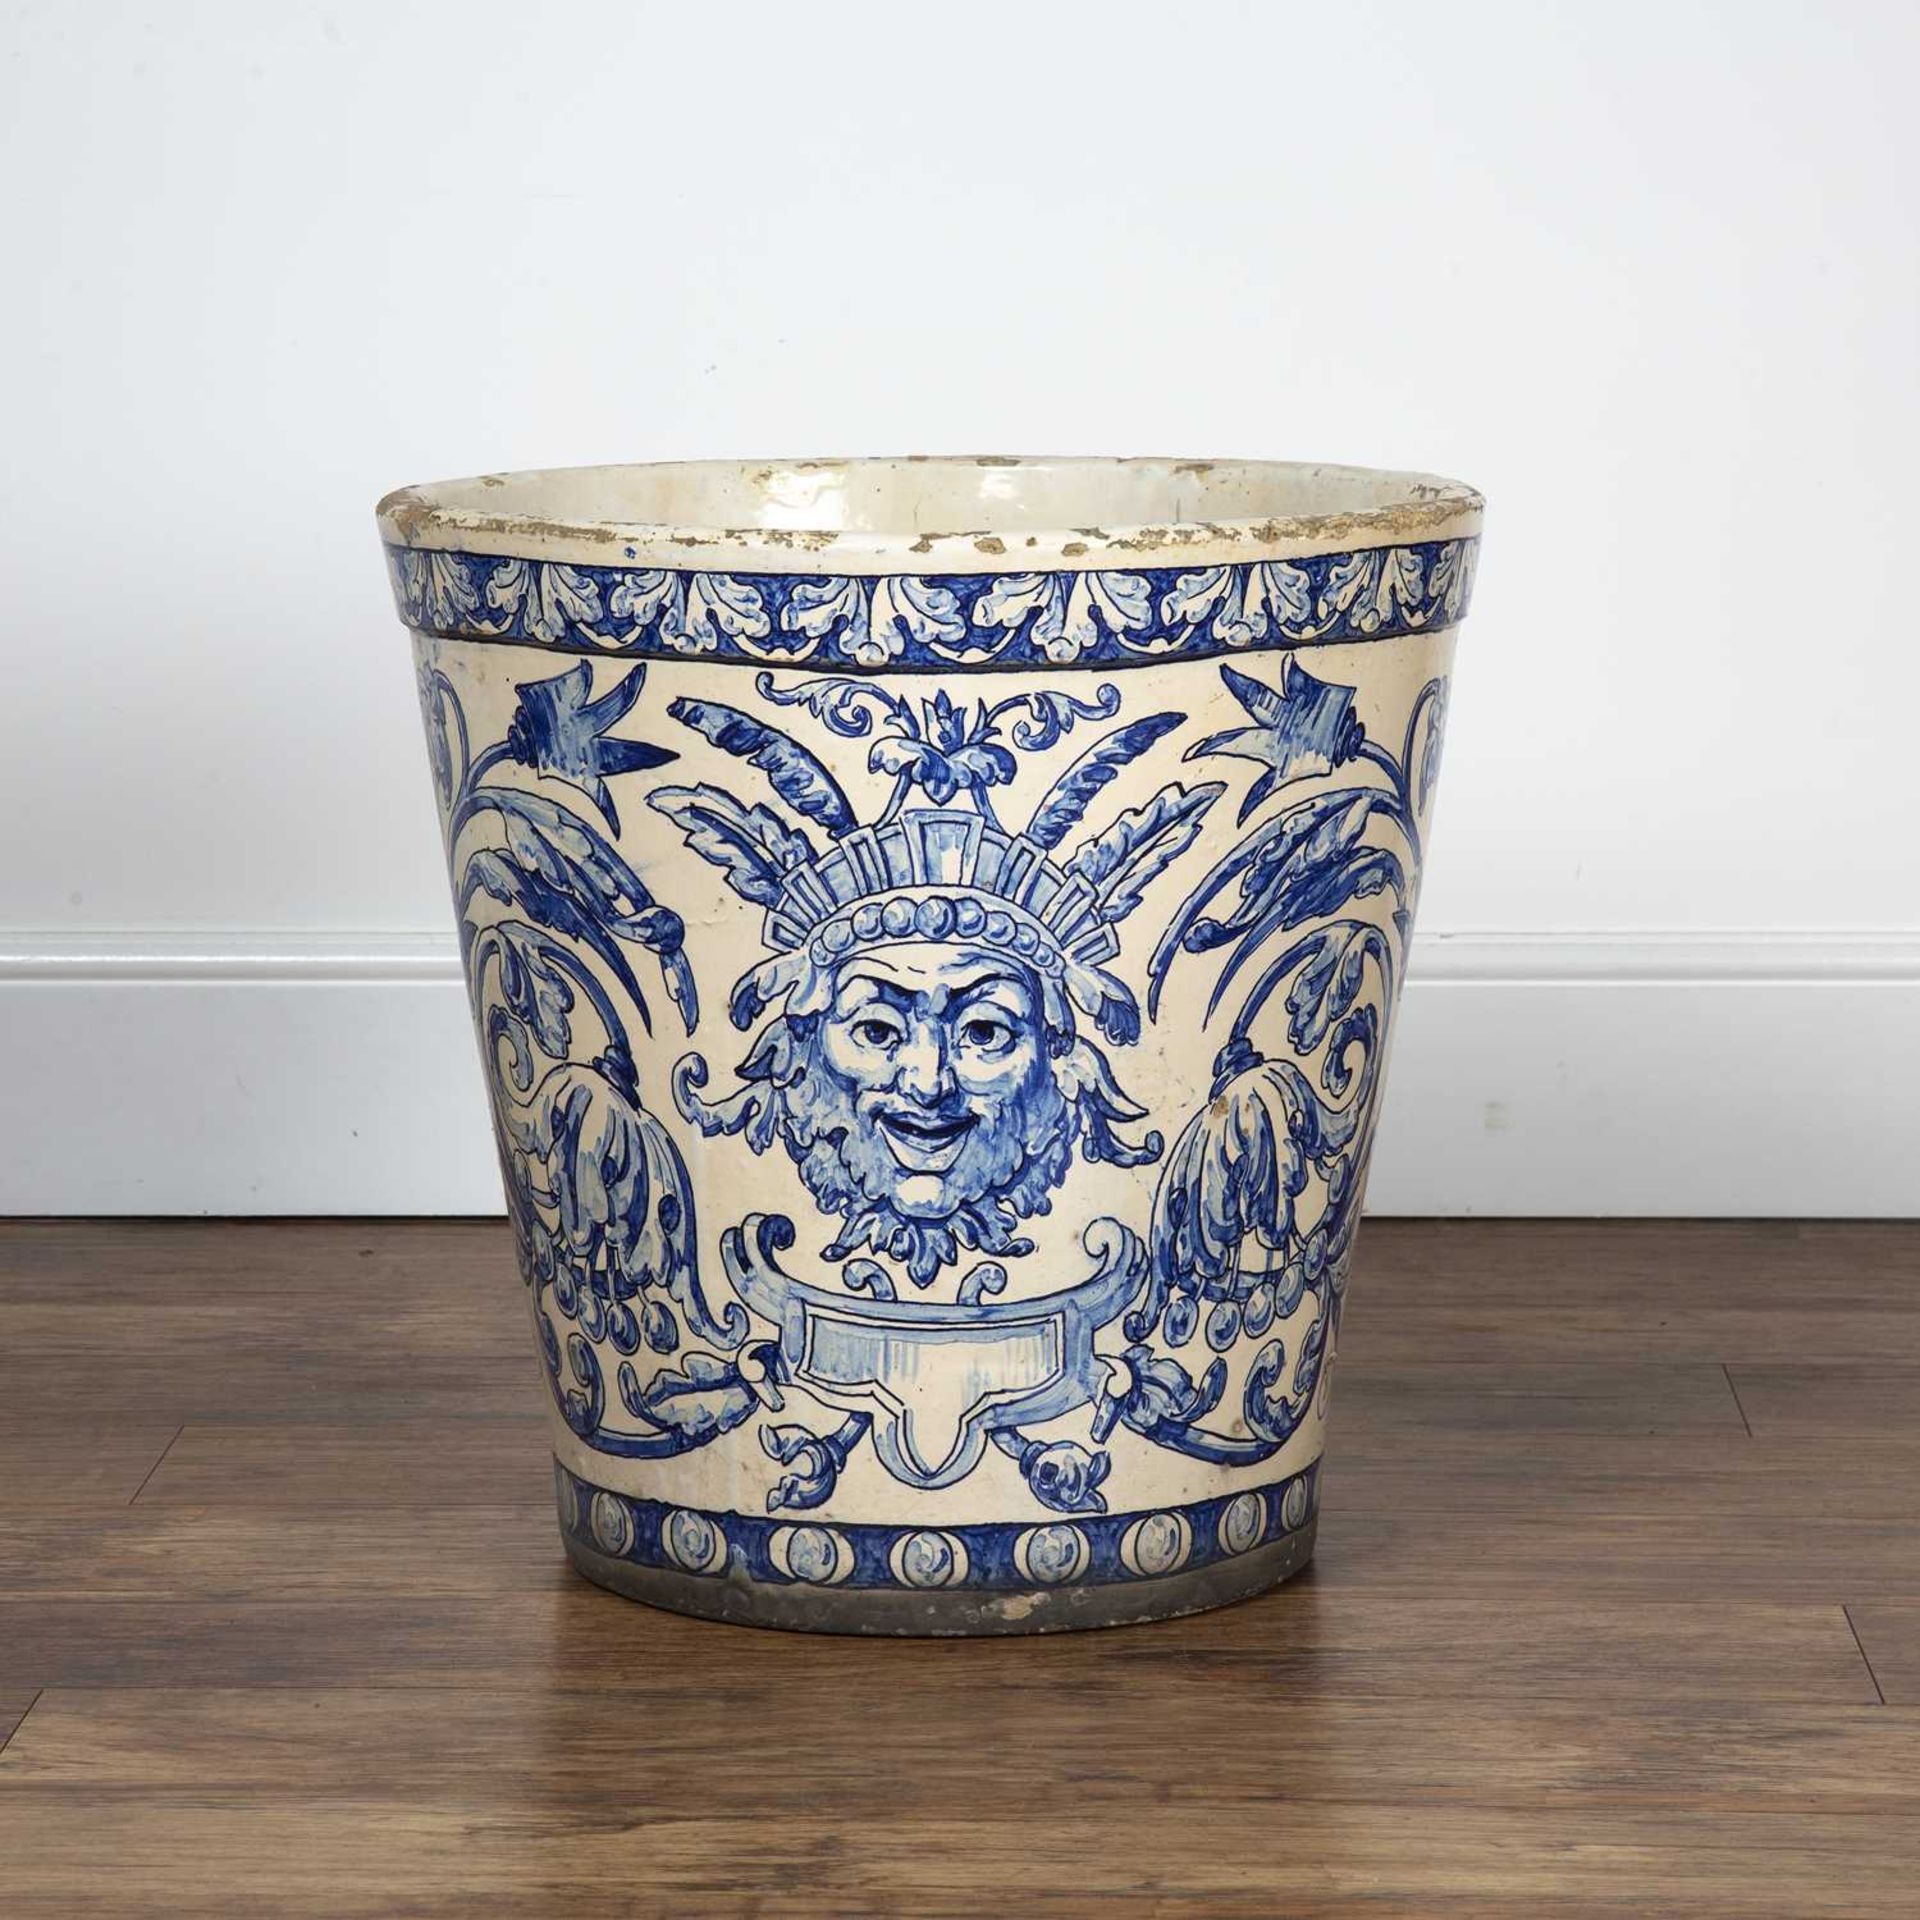 Large glazed blue and white jardiniere/planter Spanish, with trailing classical decoration, 56cm